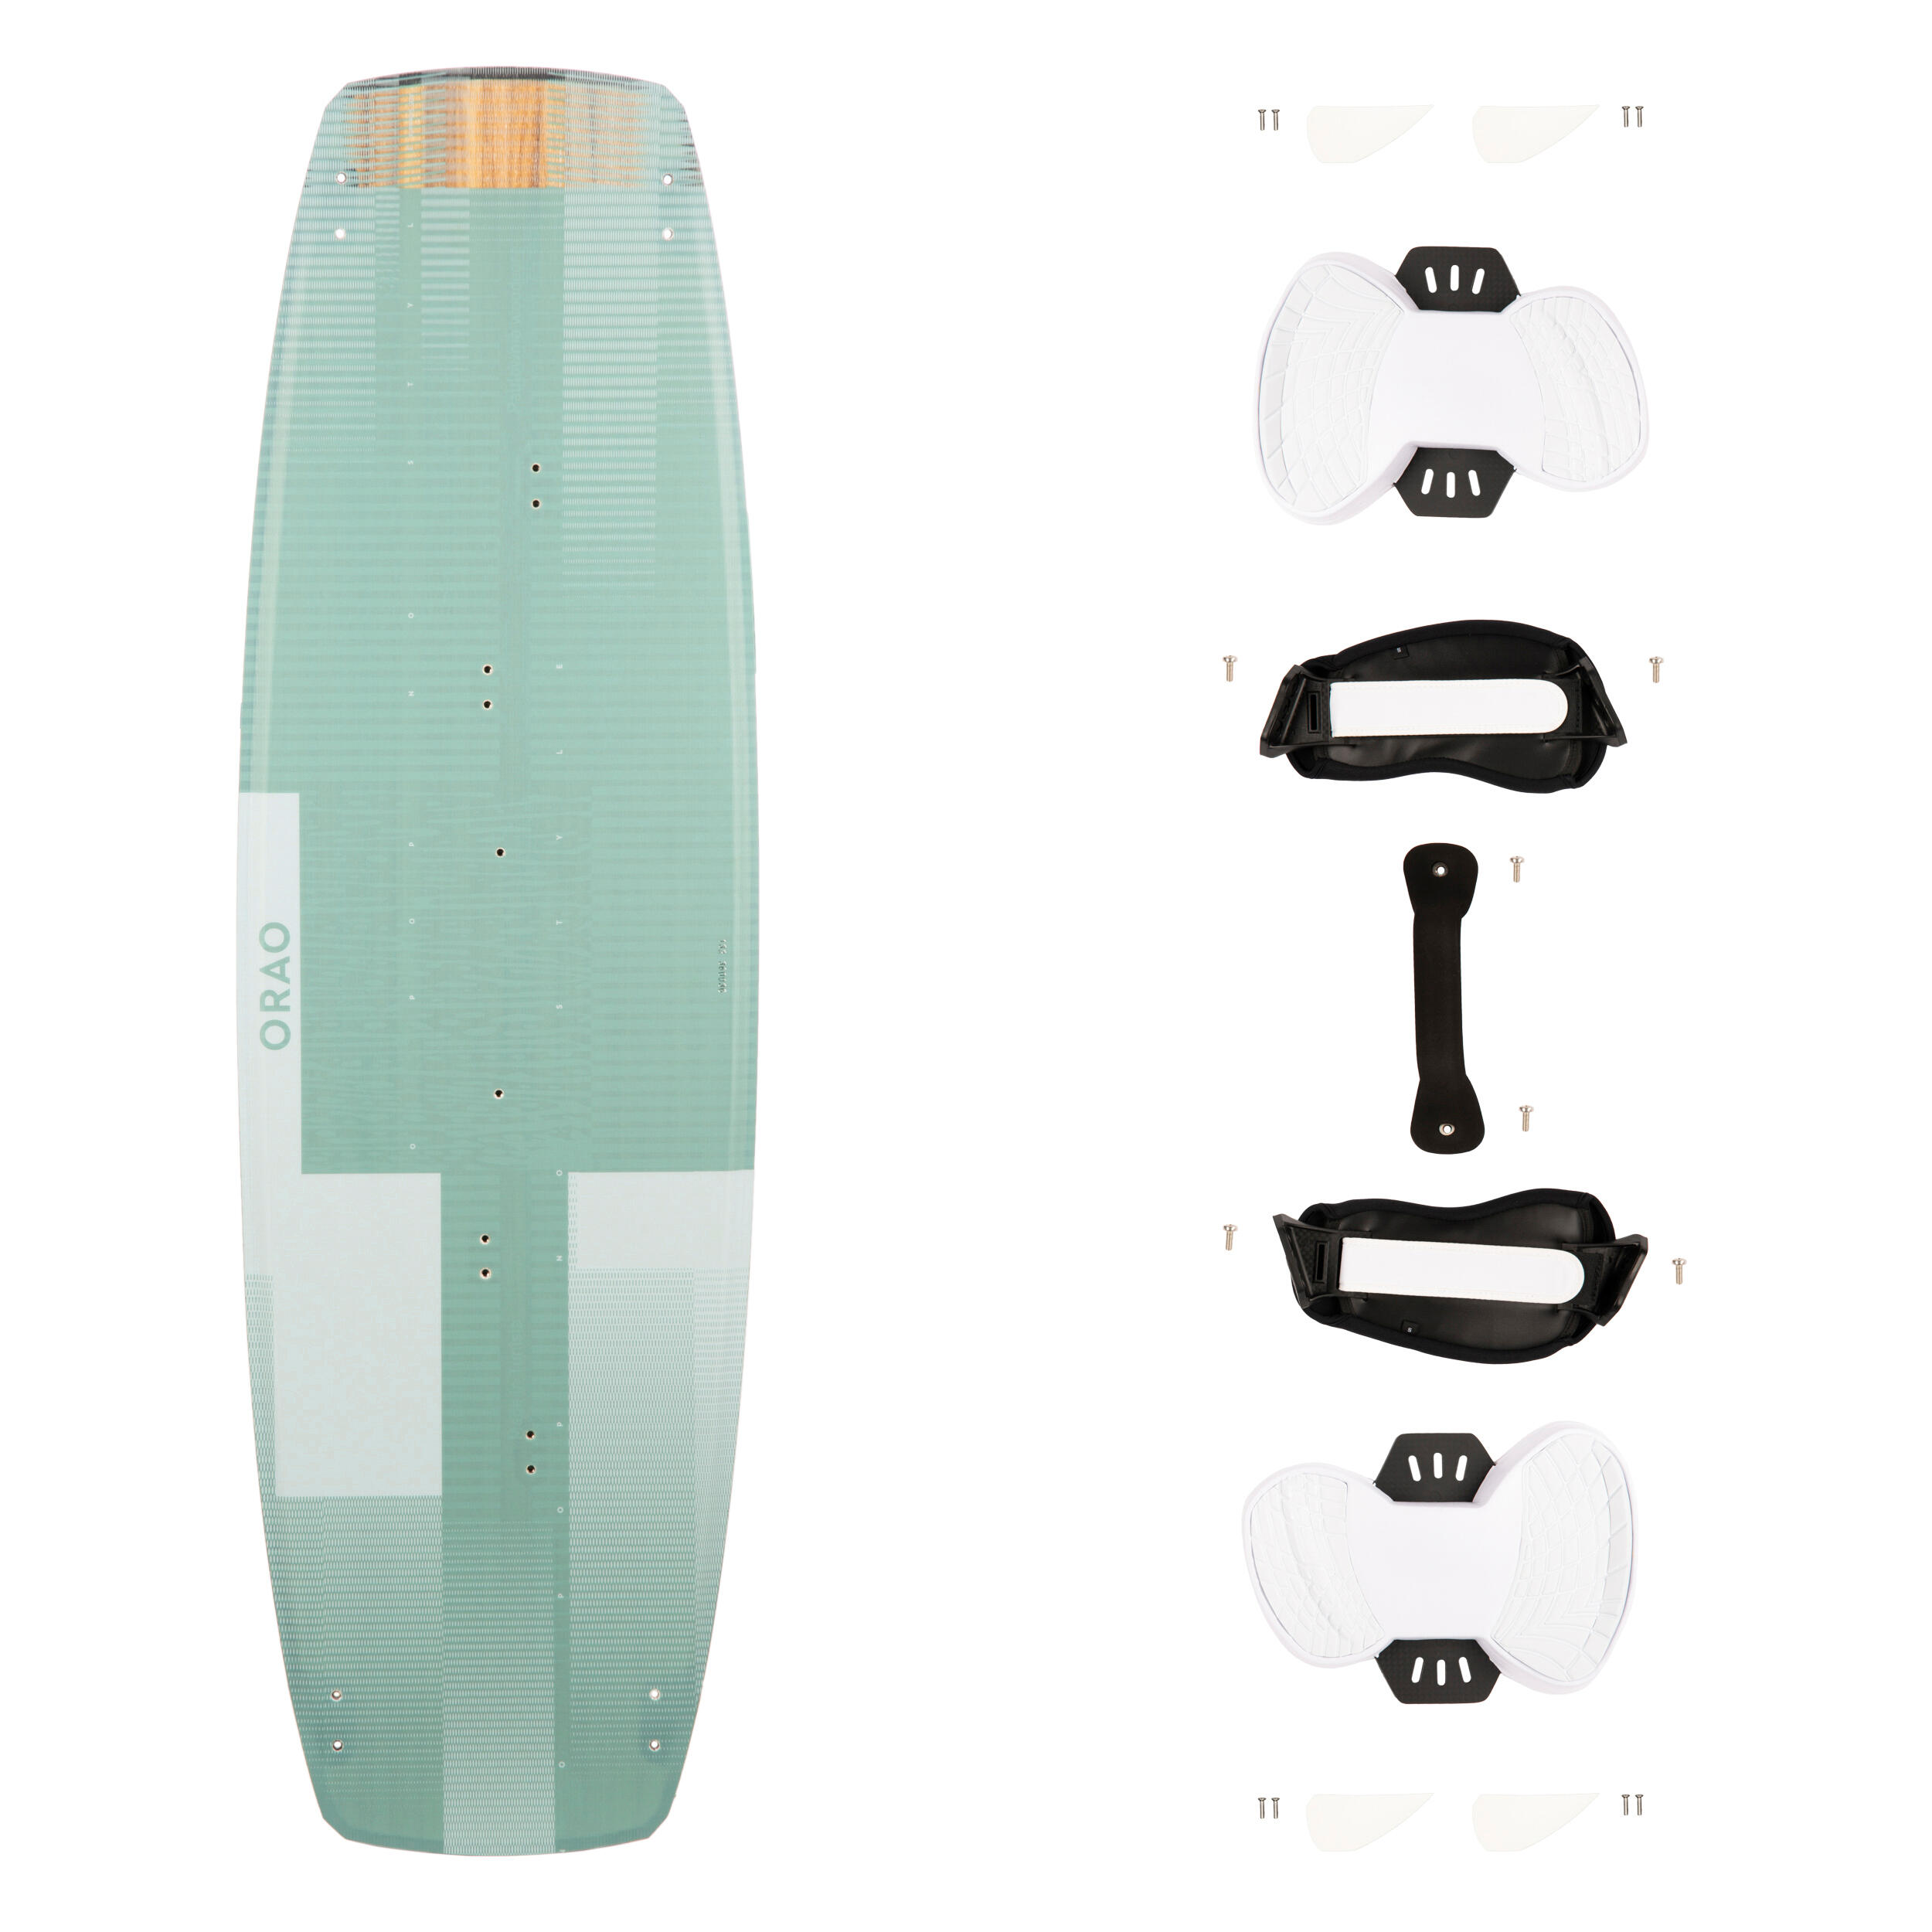 Twintip carbon kitesurf board 132 x 39 cm (pads and straps included) - TT500 1/17